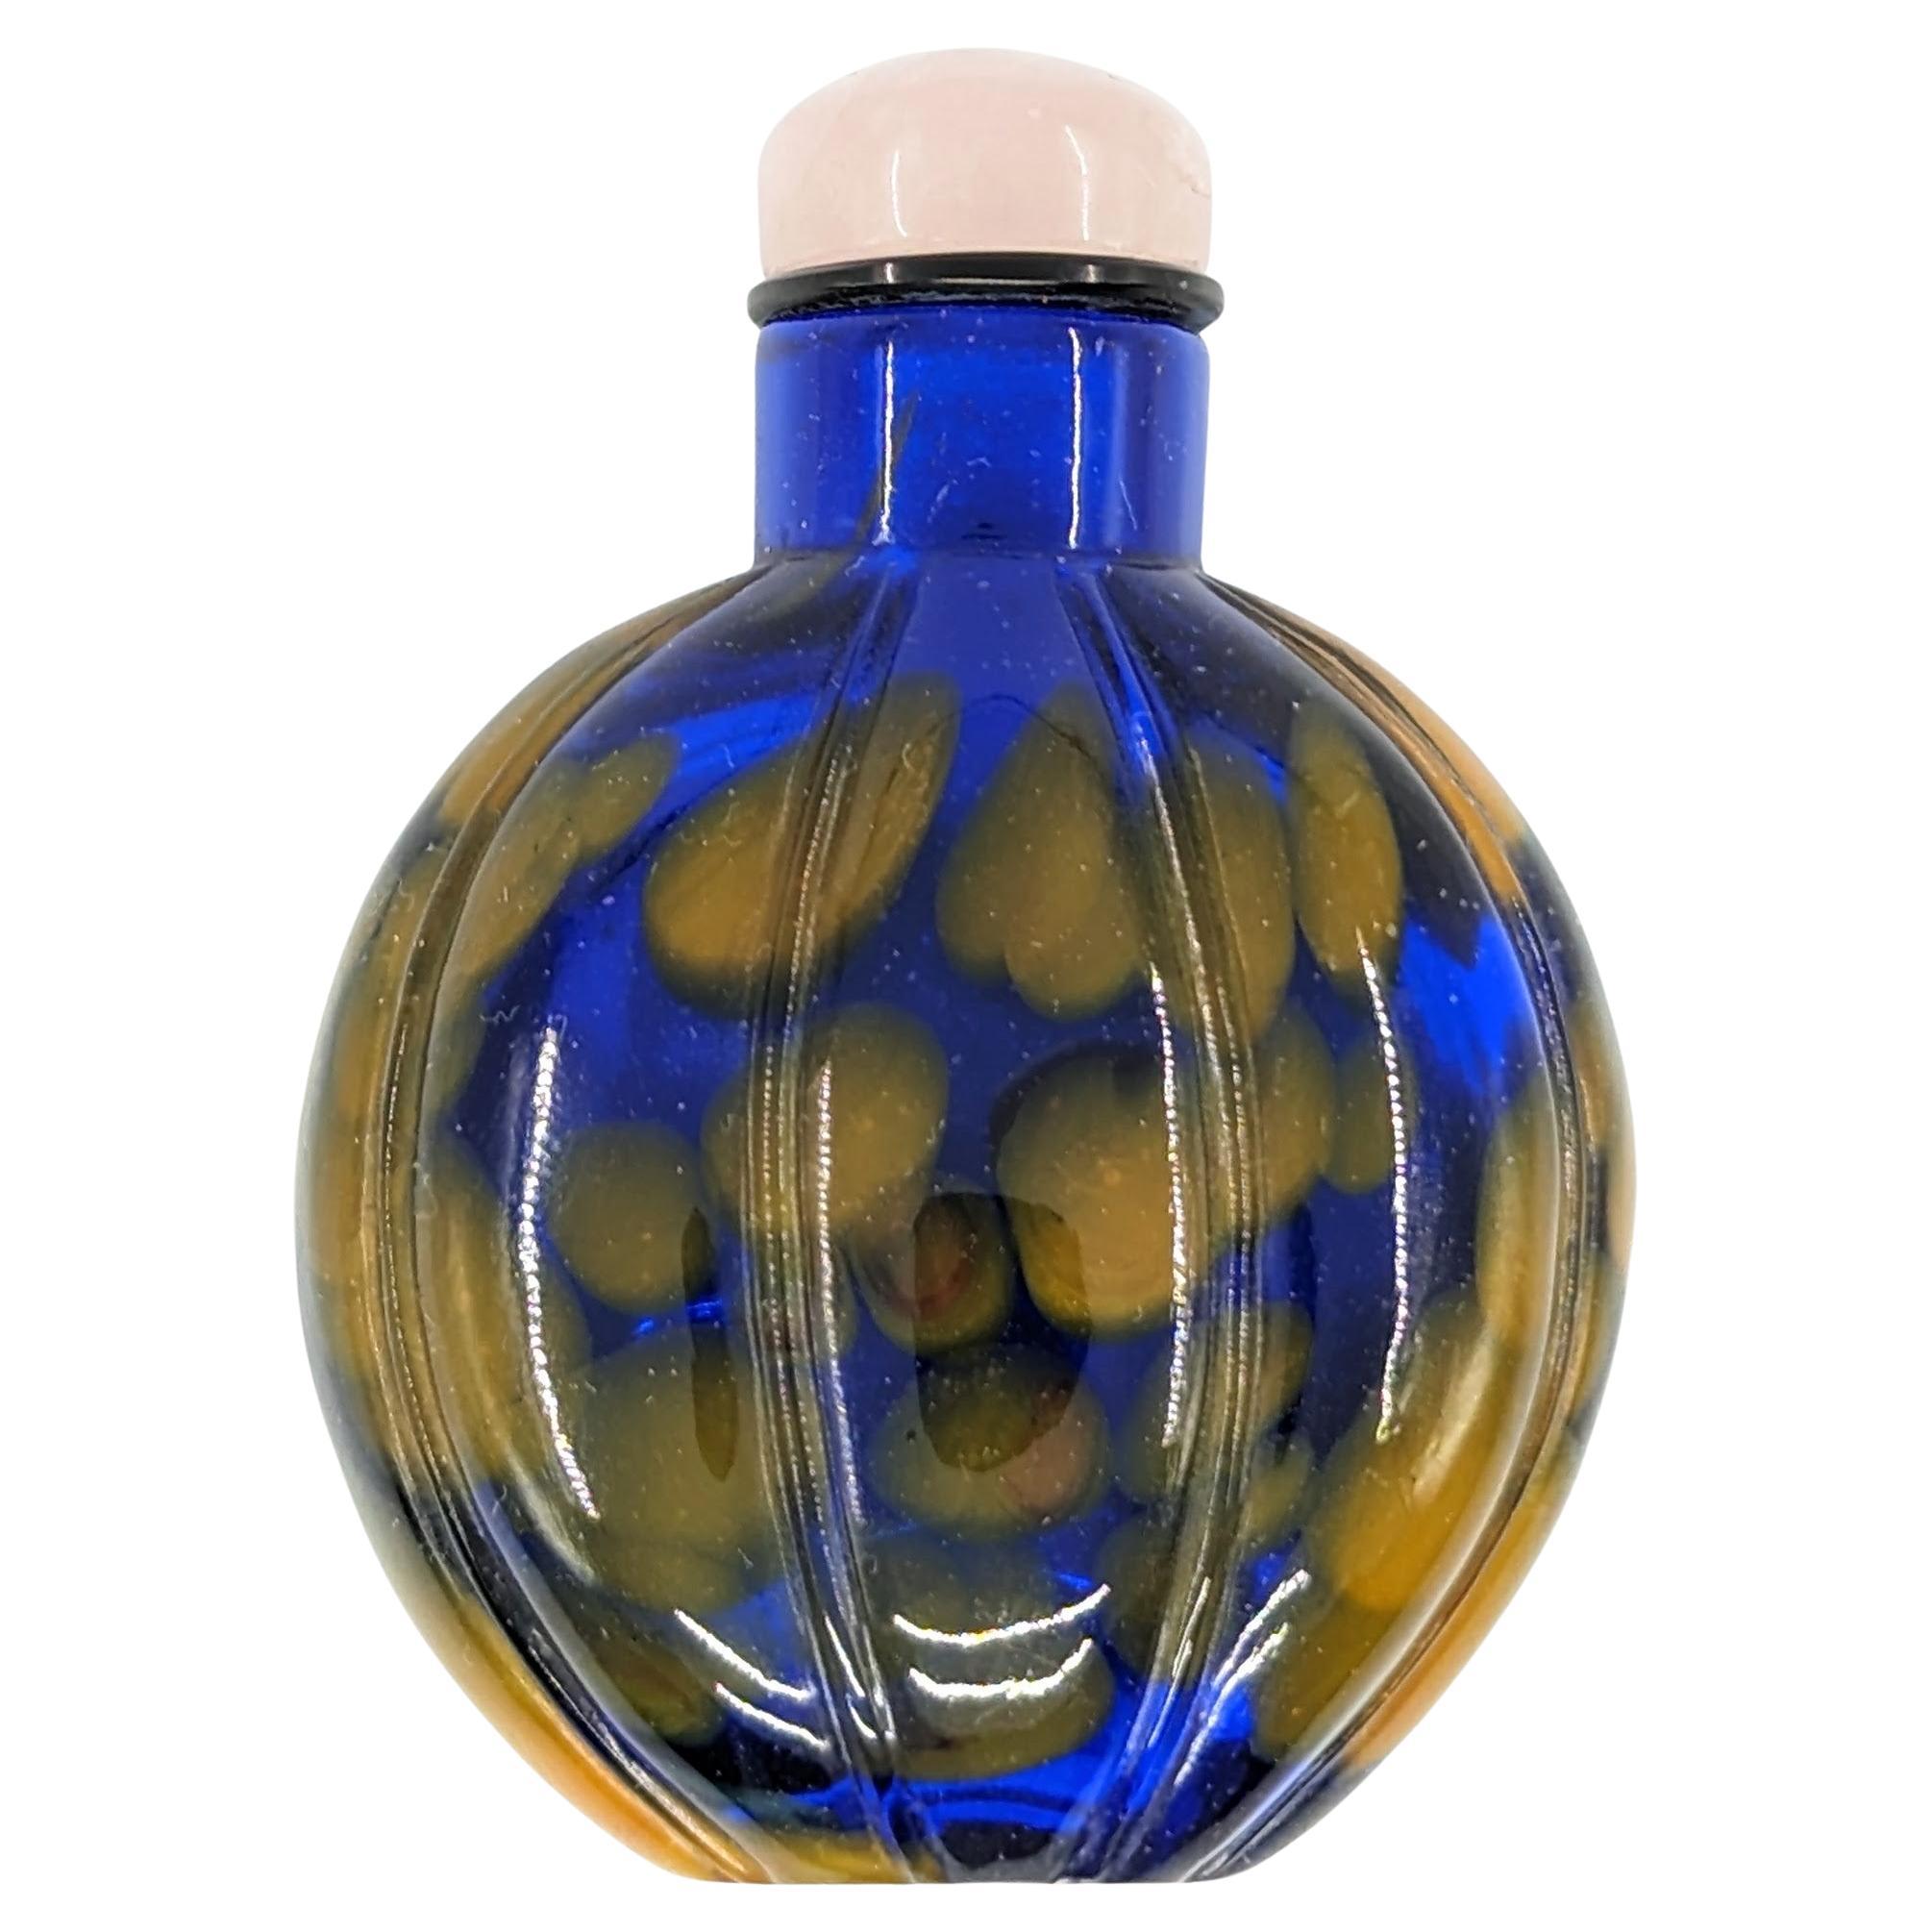 Antique Chinese Mottled Peking Glass Snuff Bottle Yellow Blue 19c Qing Dynasty